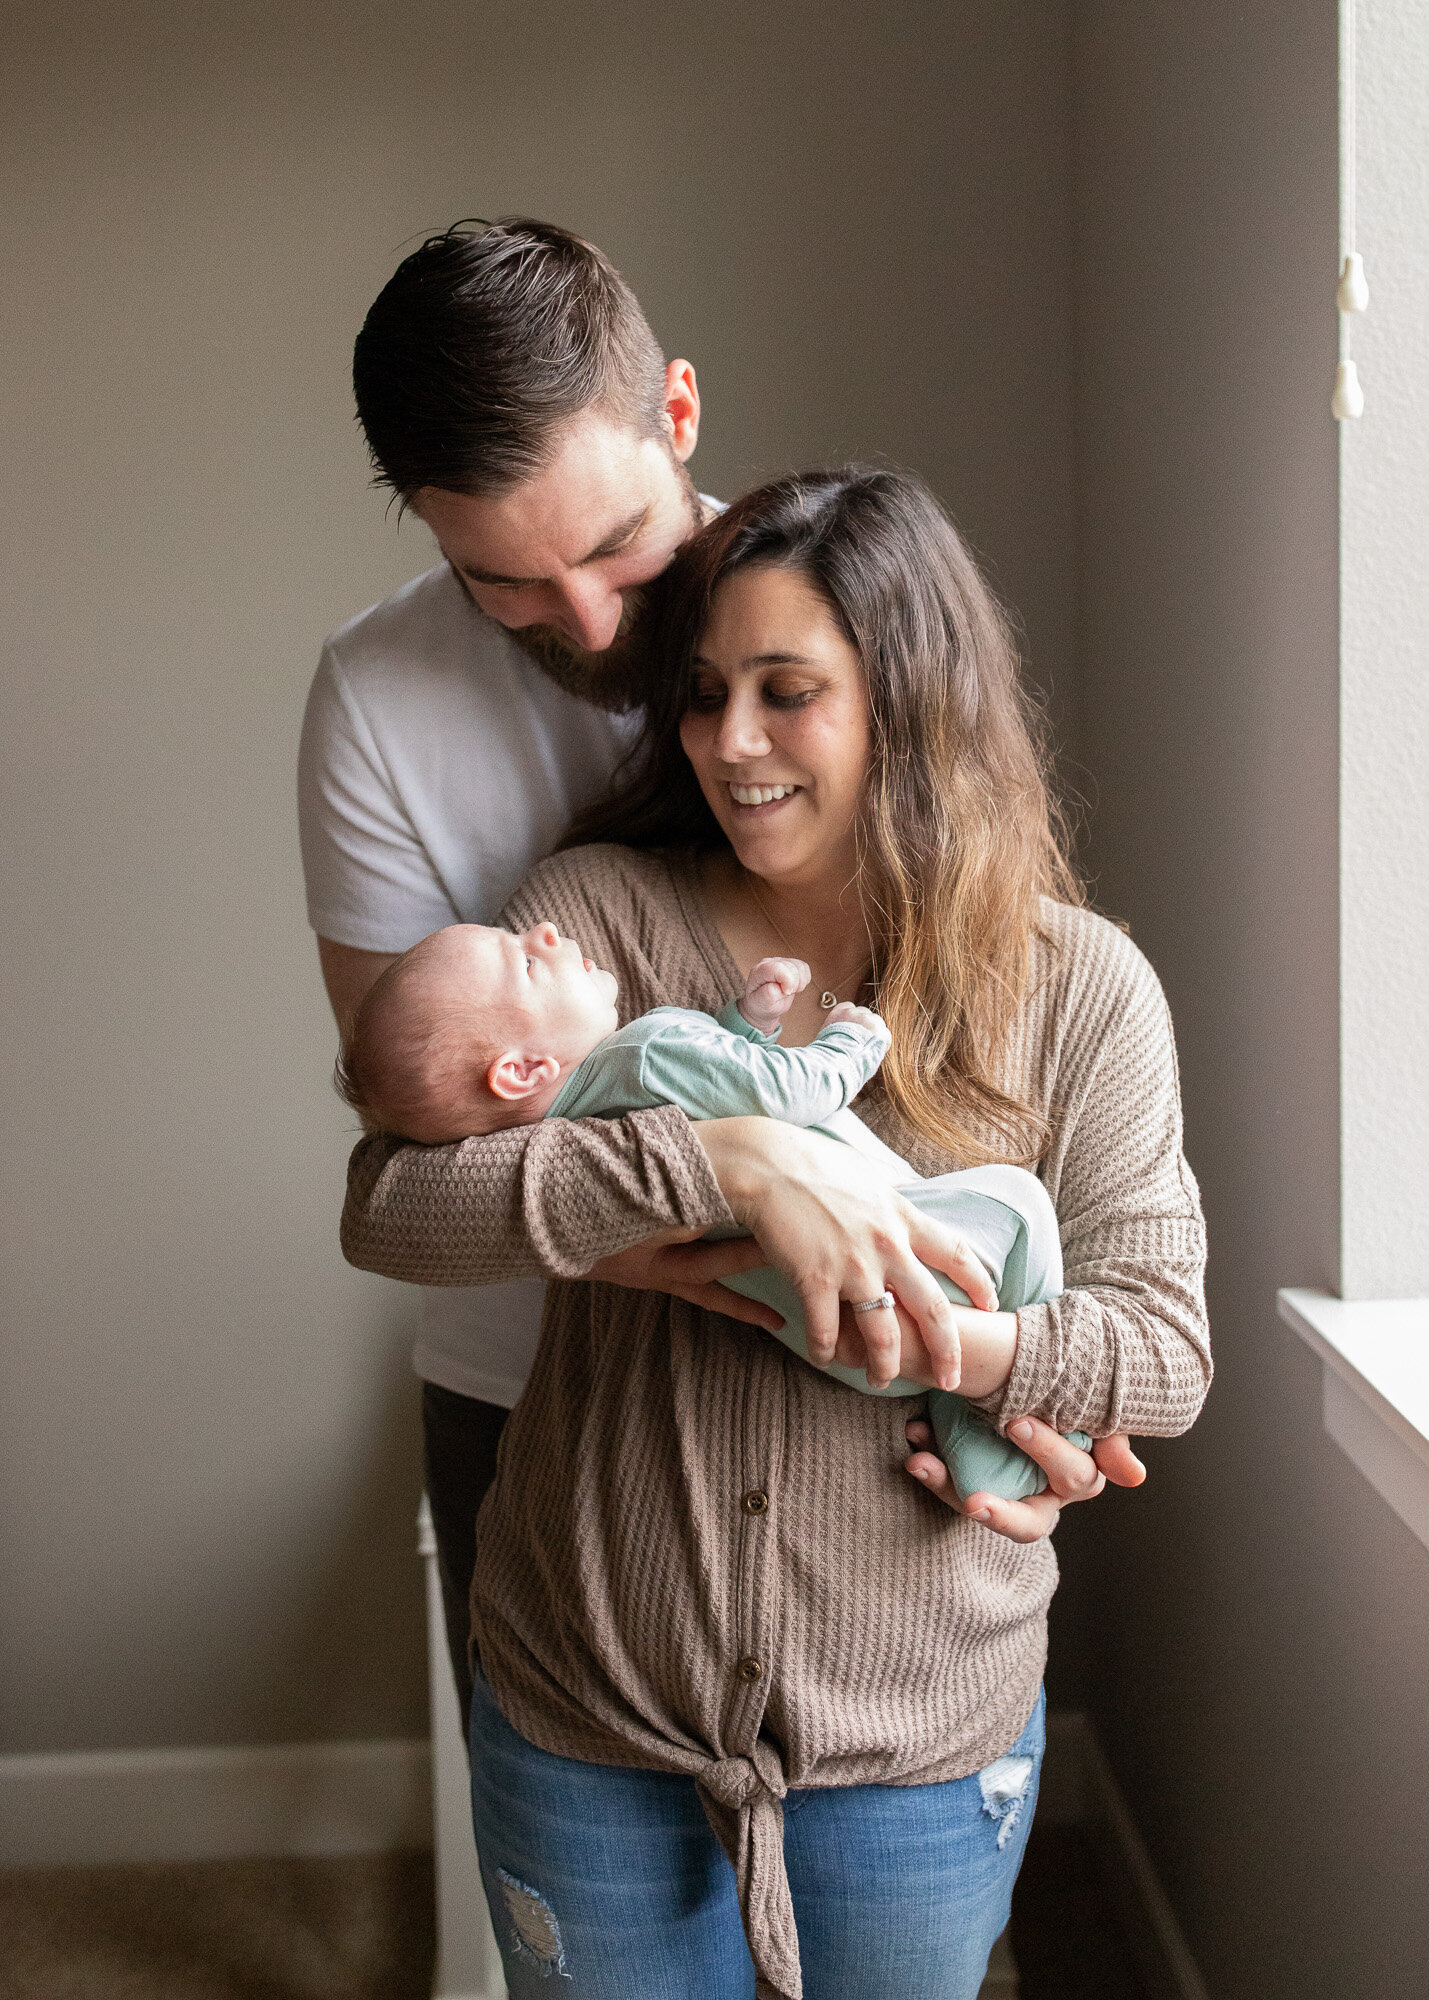 New parents loving on their newborn son by naturally lit window.